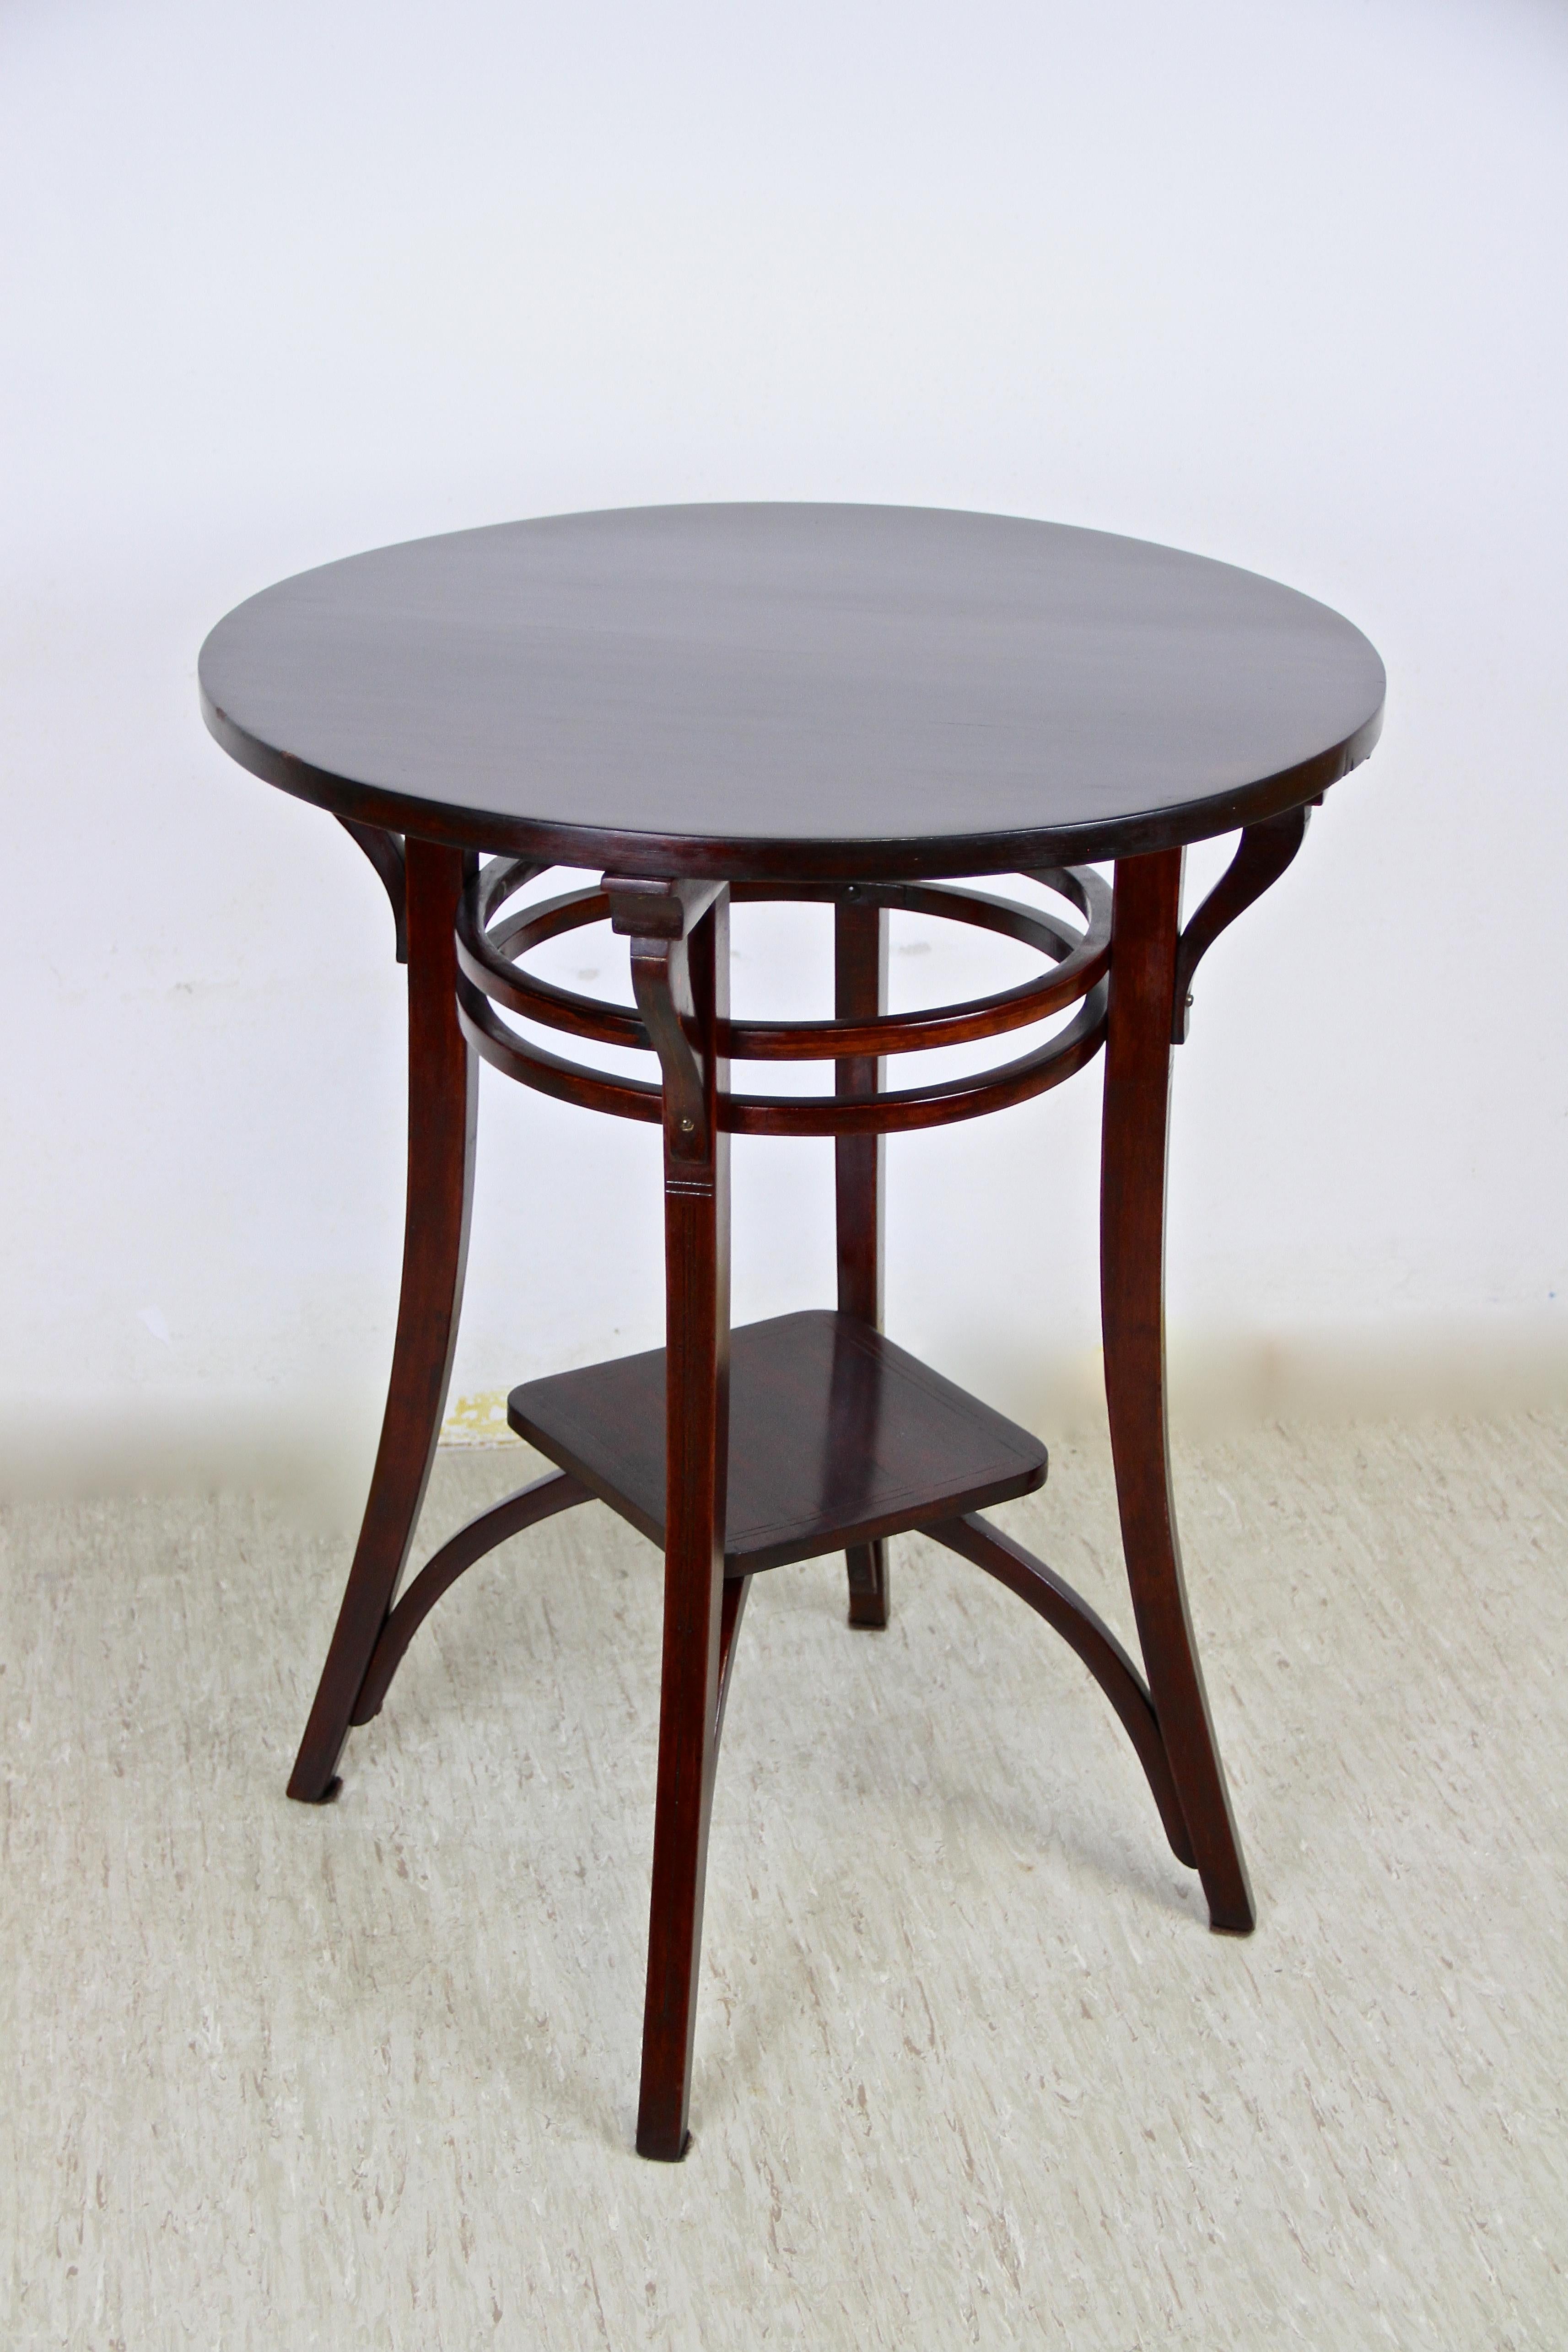 Timeless bentwood side table by the famous company of Thonet Vienna/ Austria from the early 20th century, circa 1905. The round table impresses with an exceptional design and shows an additional compartment in the lower third which floats on four